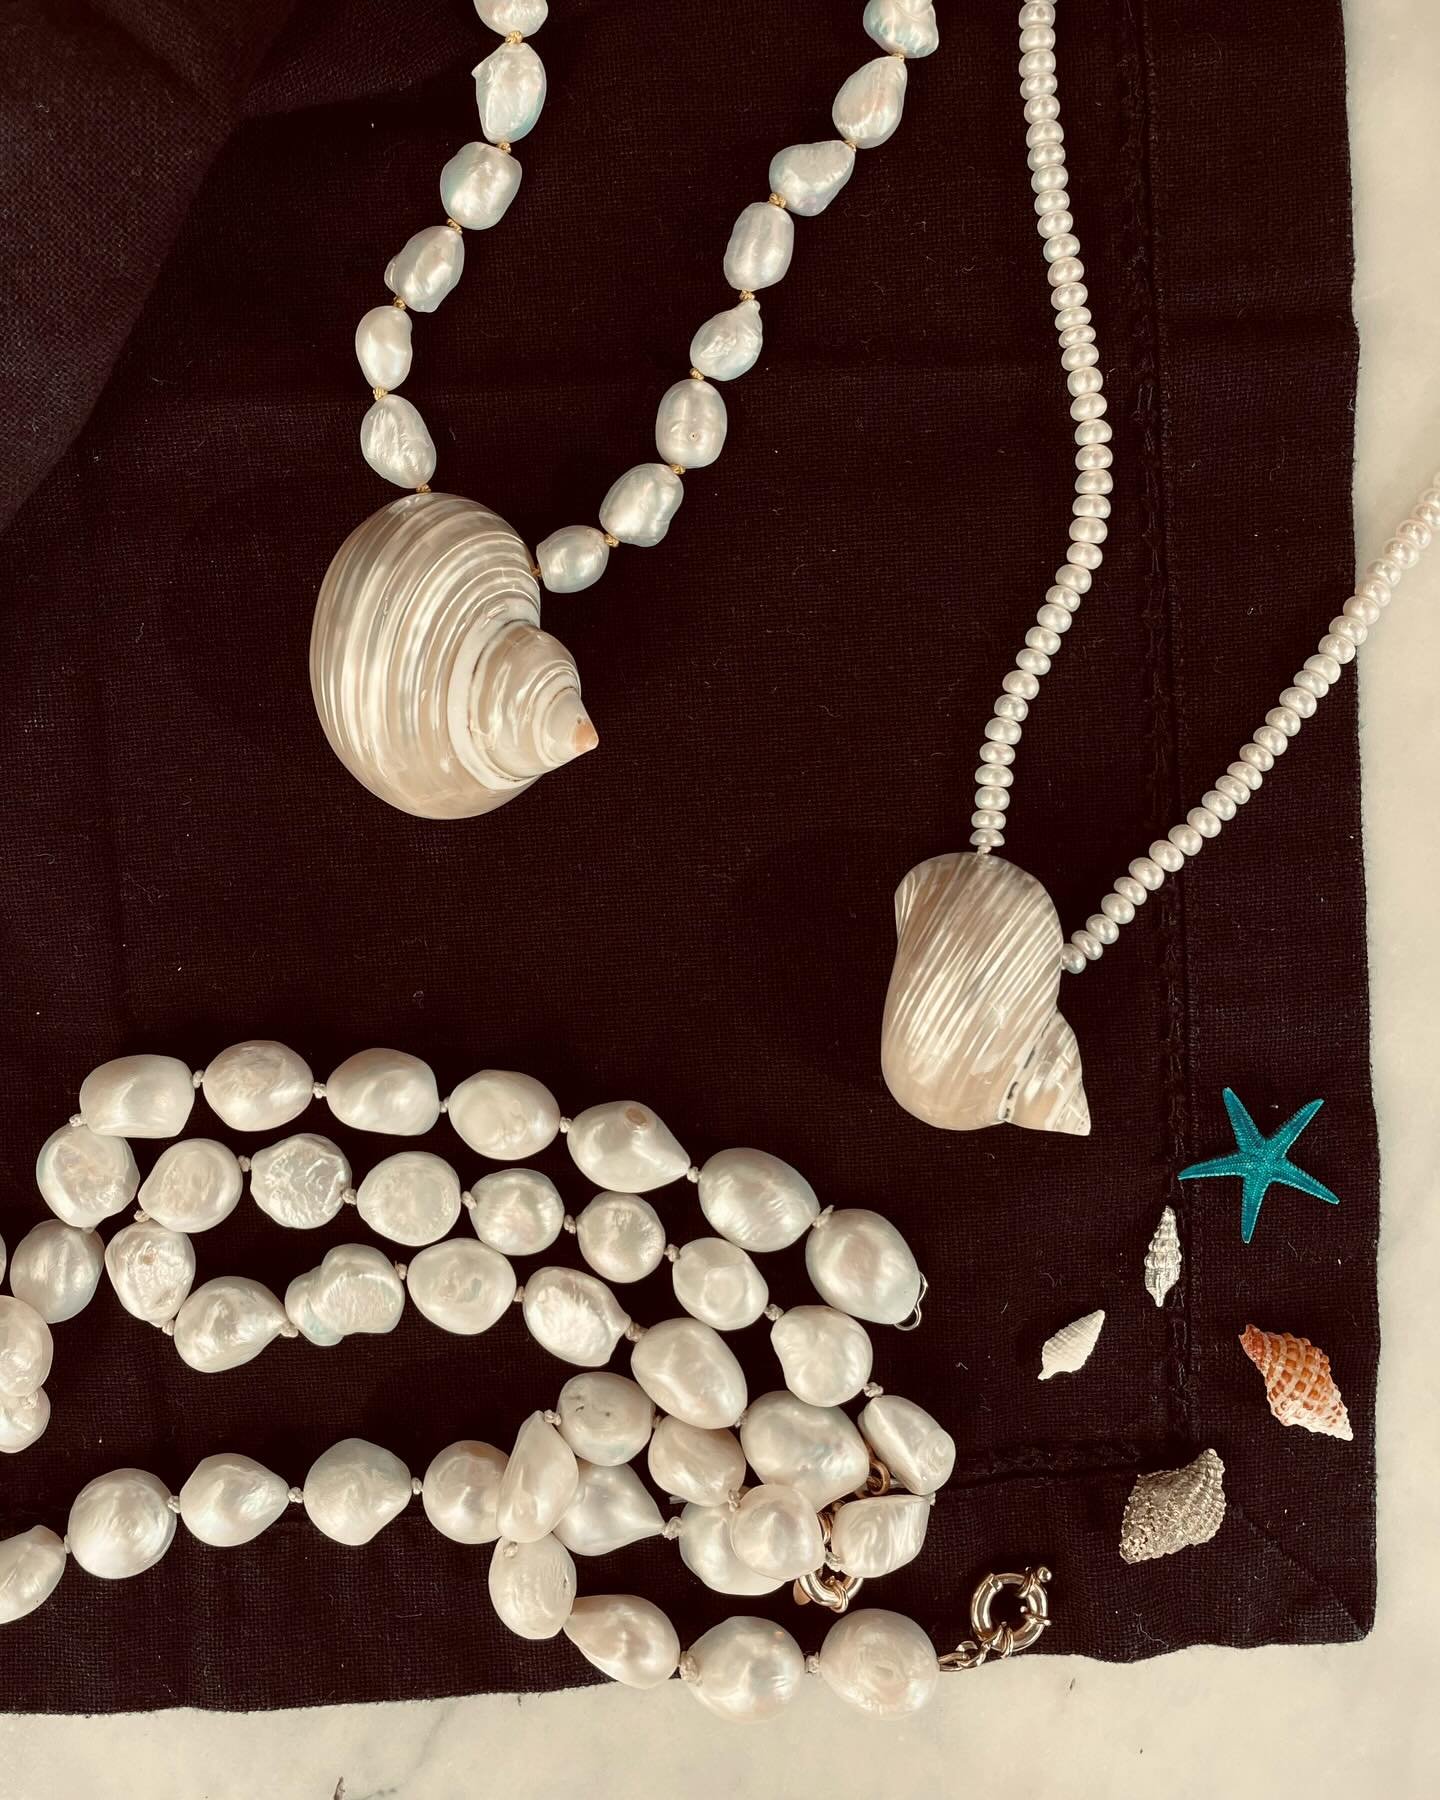 Design process of our new fresh water pearl range 🐚 
First styles available at NOAH. 

All unique one of a kind made in Cape Town. 

#pearl #necklesses #freshwaterpearls #capetown #tamboerskloof #southafrica #smallluxuryhotels #treatyourself #happin